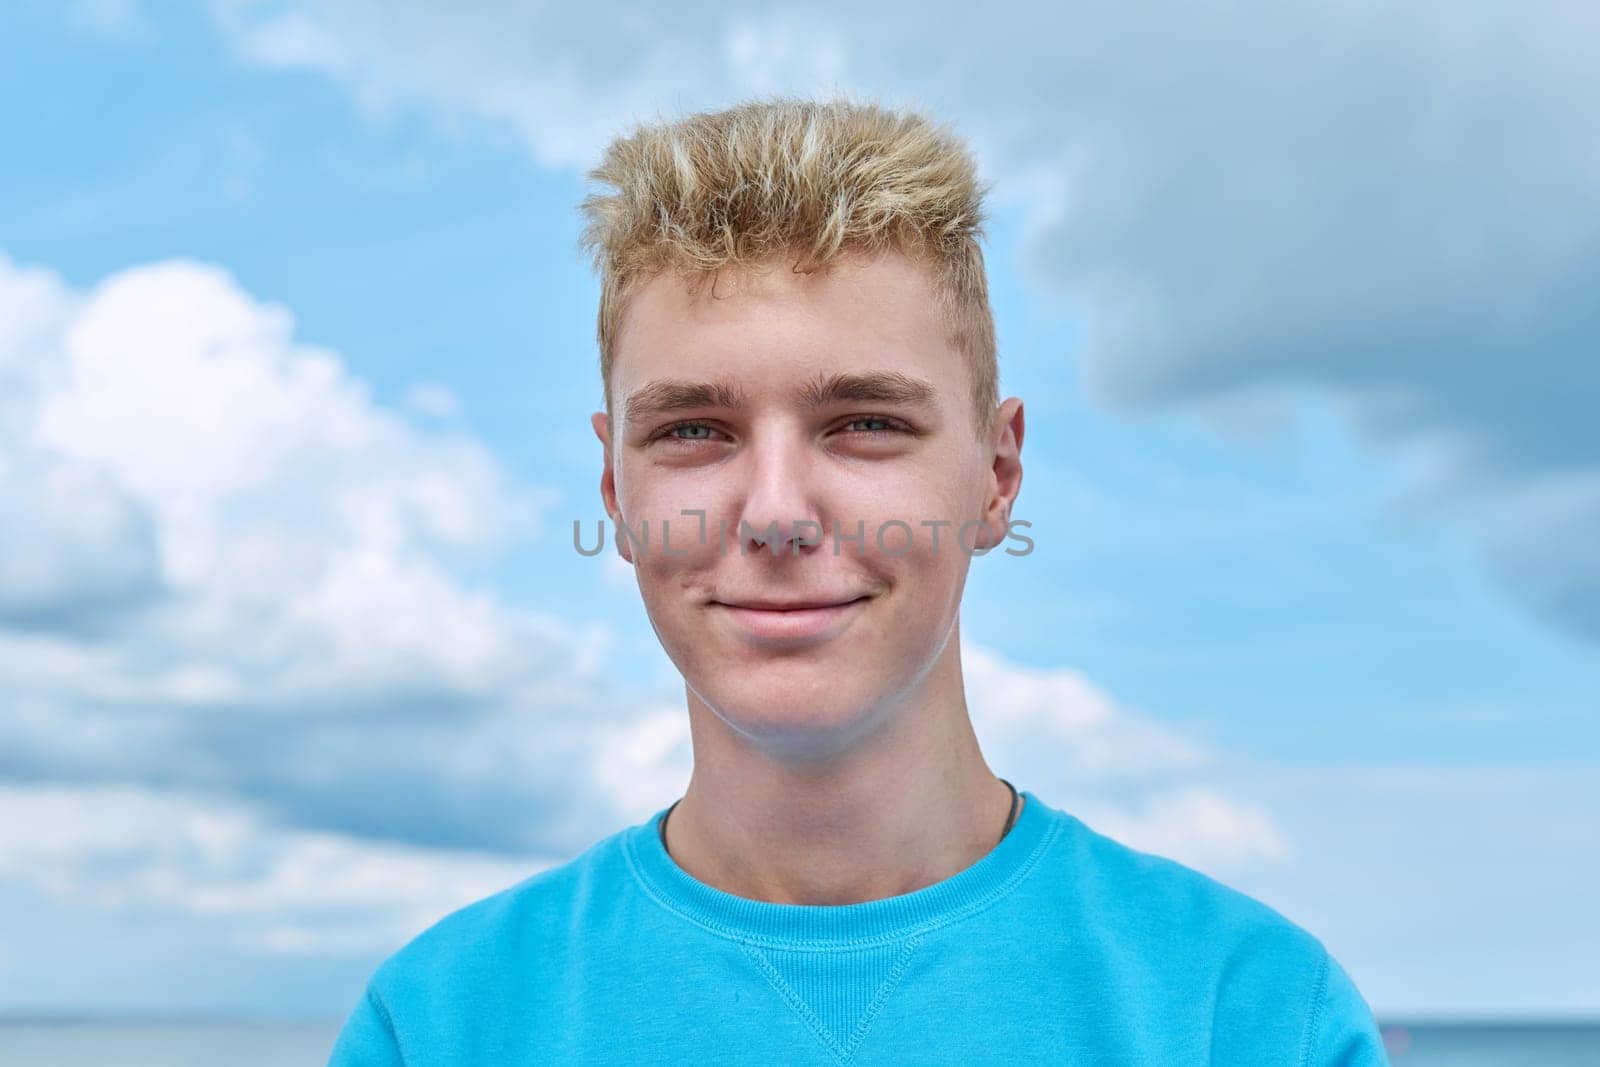 Headshot portrait of handsome smiling teenage guy, face of positive young male against blue sky in clouds. Youth, 18, 19, 20 years of age, lifestyle, enjoy fun, holiday vacation, outdoor